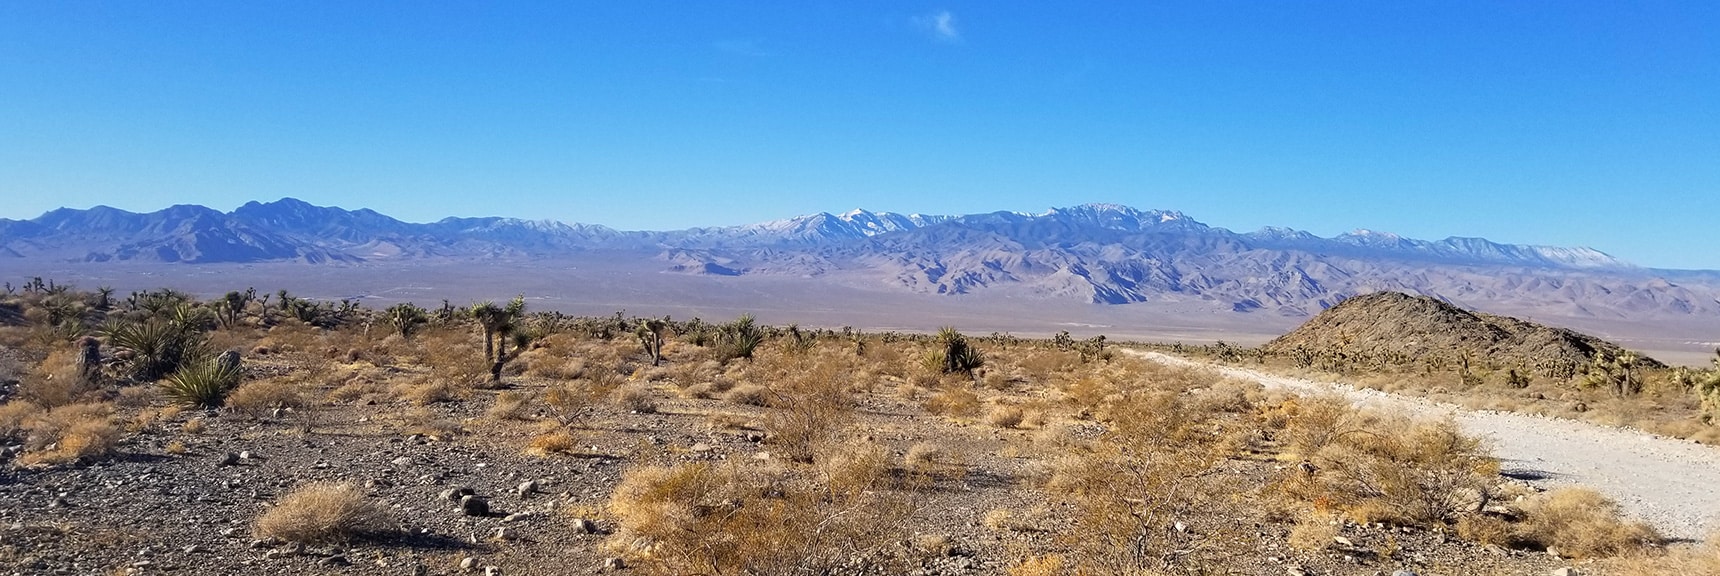 View Down Mormon Well Road Toward Mt. Charleston and La Madre Mountain Wilderness from Intersection of Mormon Well Road and Gass Peak Road | Gass Peak Road Circuit | Desert National Wildlife Refuge | Nevada